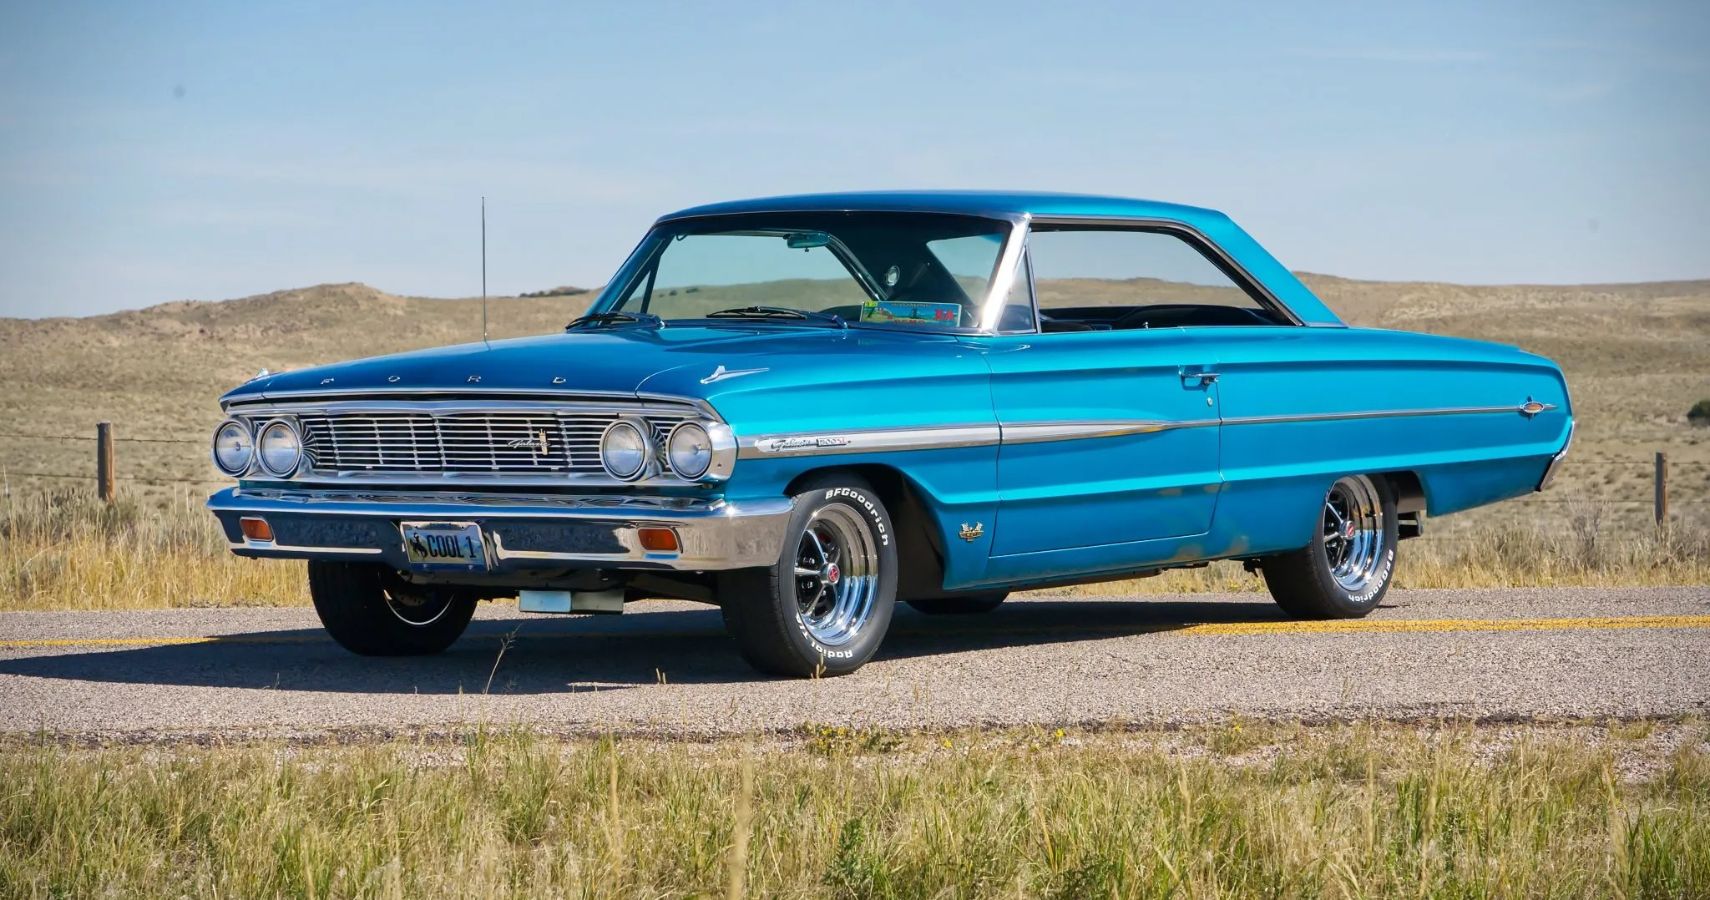 10 Things Only True Gearheads Know About The Ford Galaxie 500